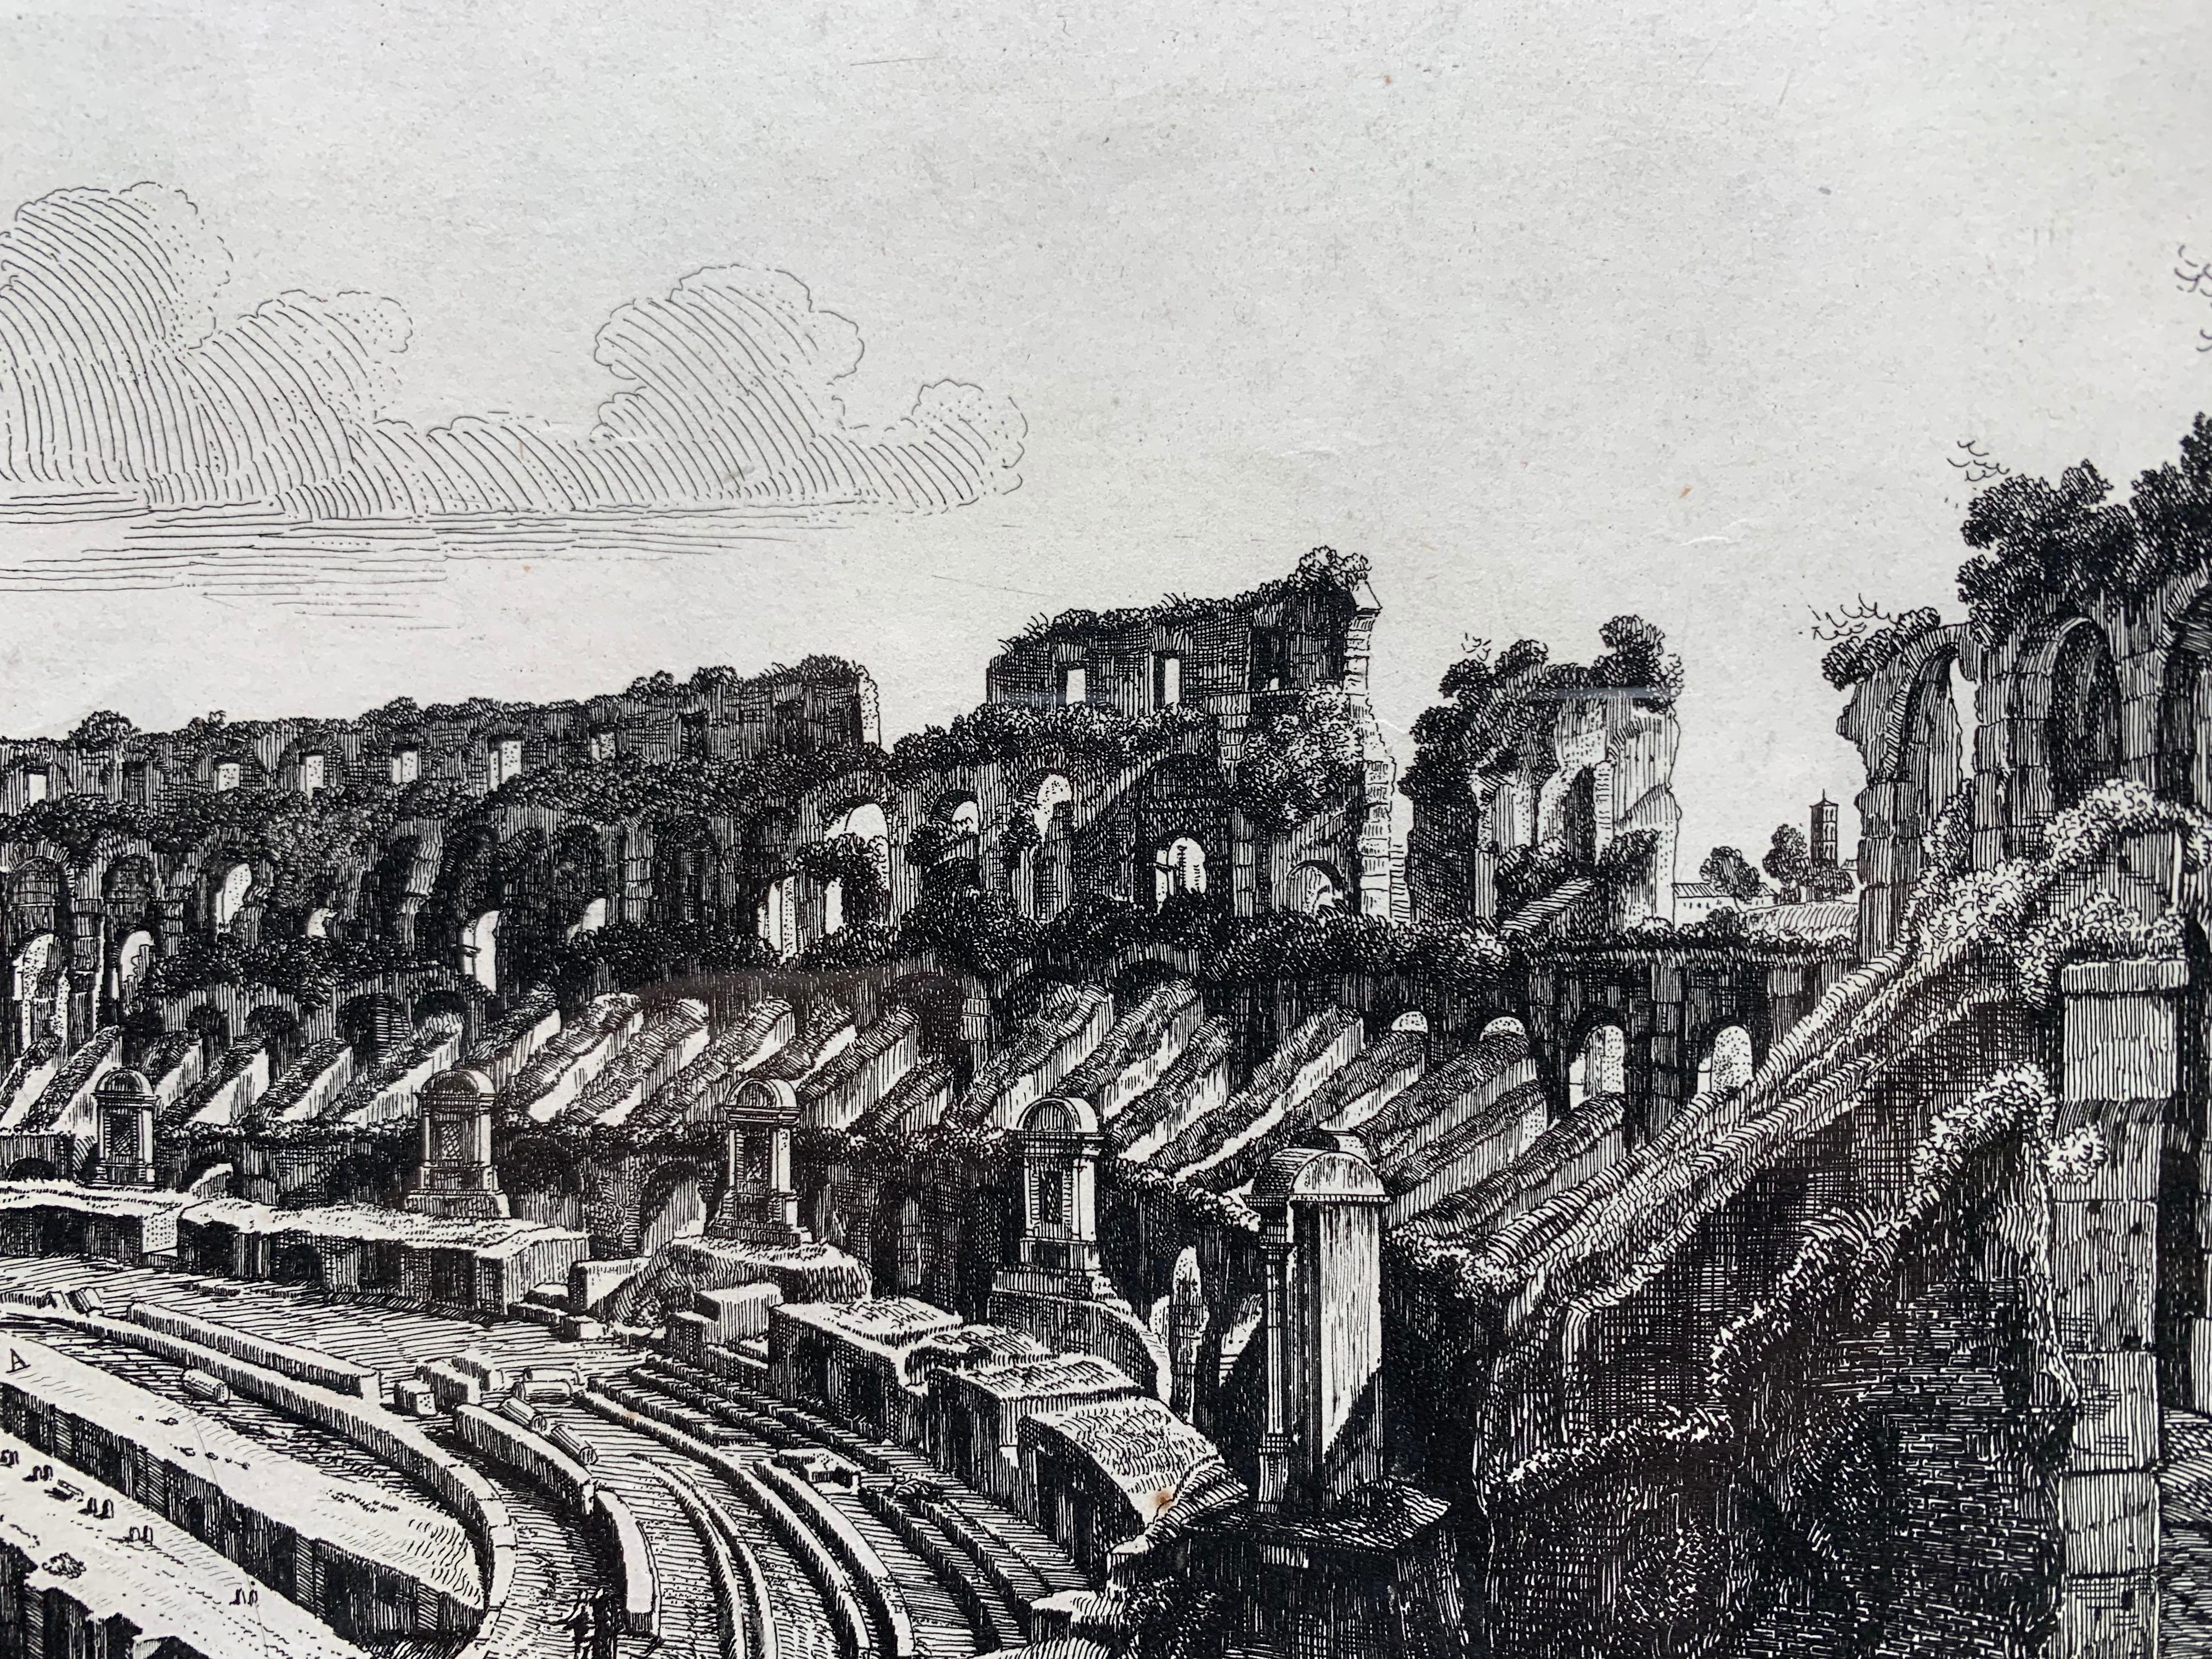 The interior of the Colosseum in Rome, viewed from one end of the arena, with several couples, either grand tourists or surveyors, strolling around the ruined structure. It depicts the ongoing excavations to reveal the substructure that had